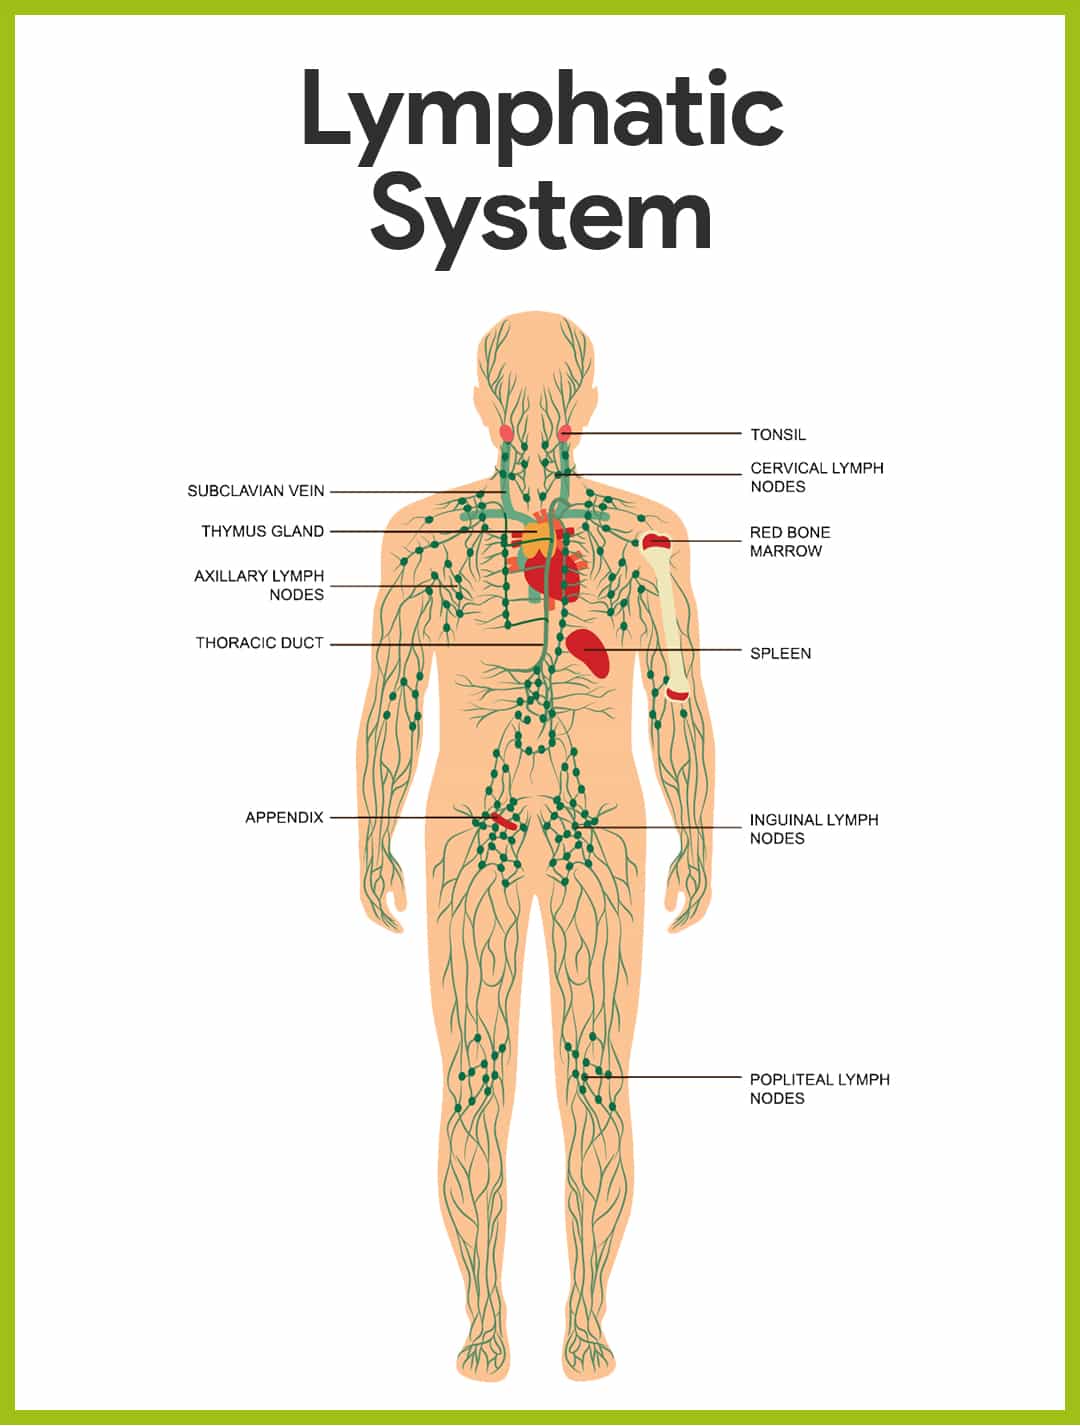 Lymphatic System Anatomy and Physiology - Nurseslabs